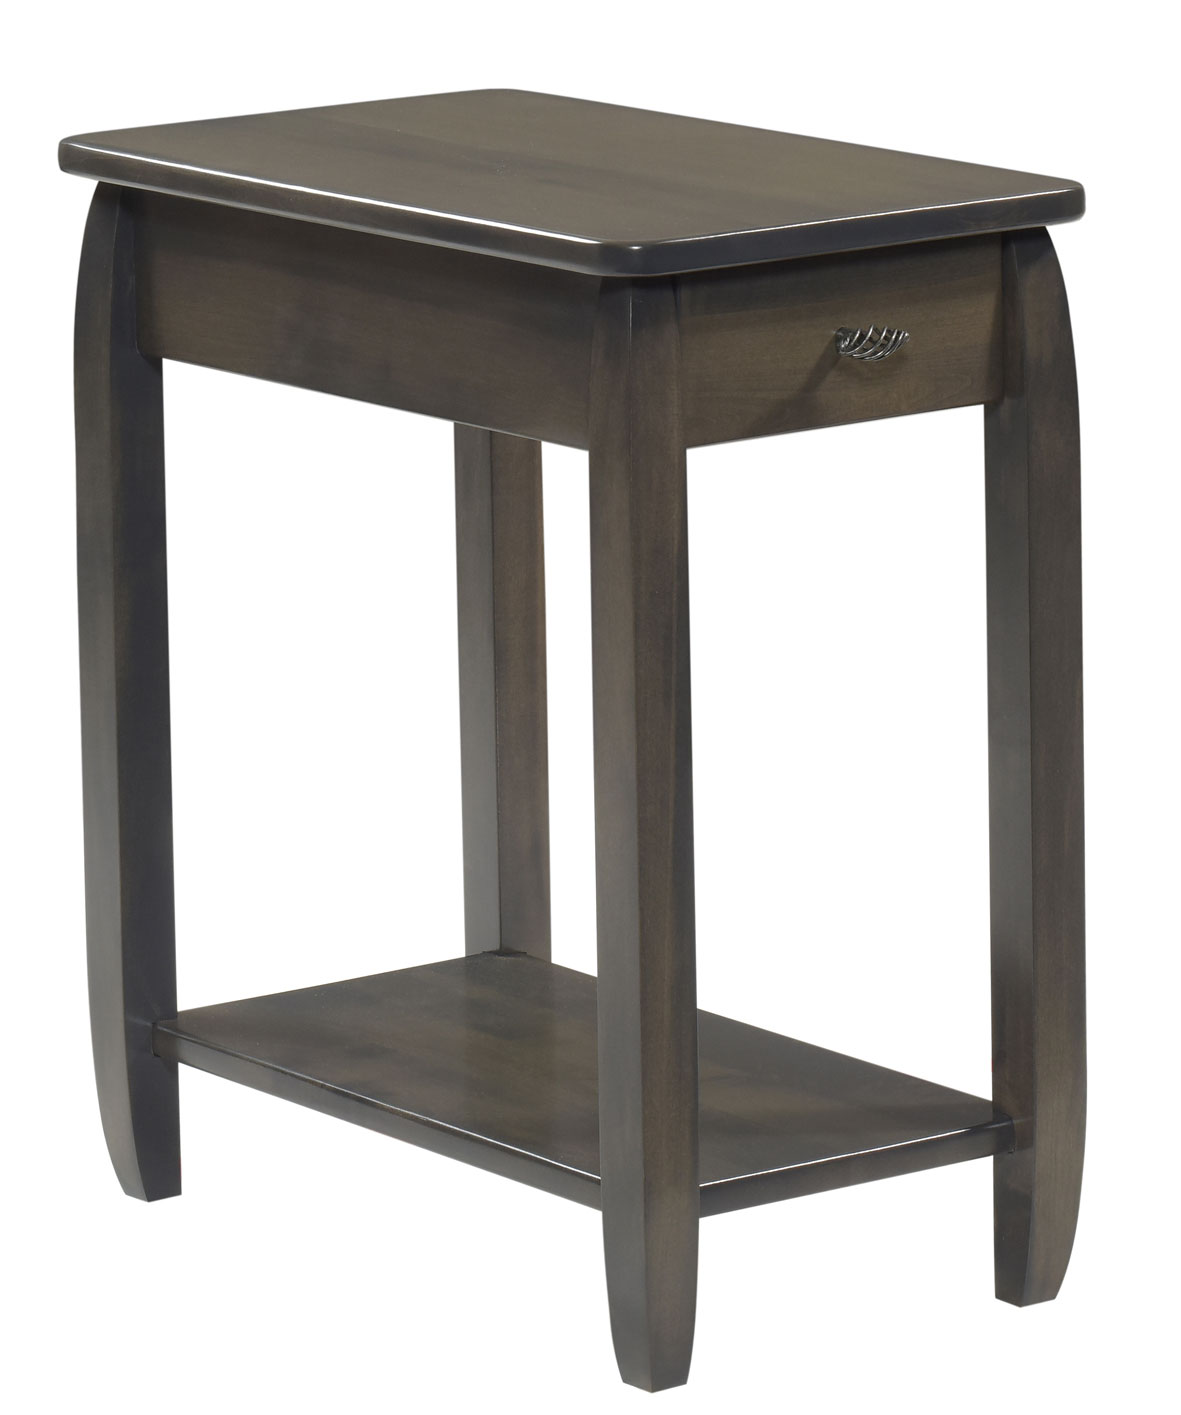 Apache Chairside Table in Brown Maple with Antique Slate Stain.